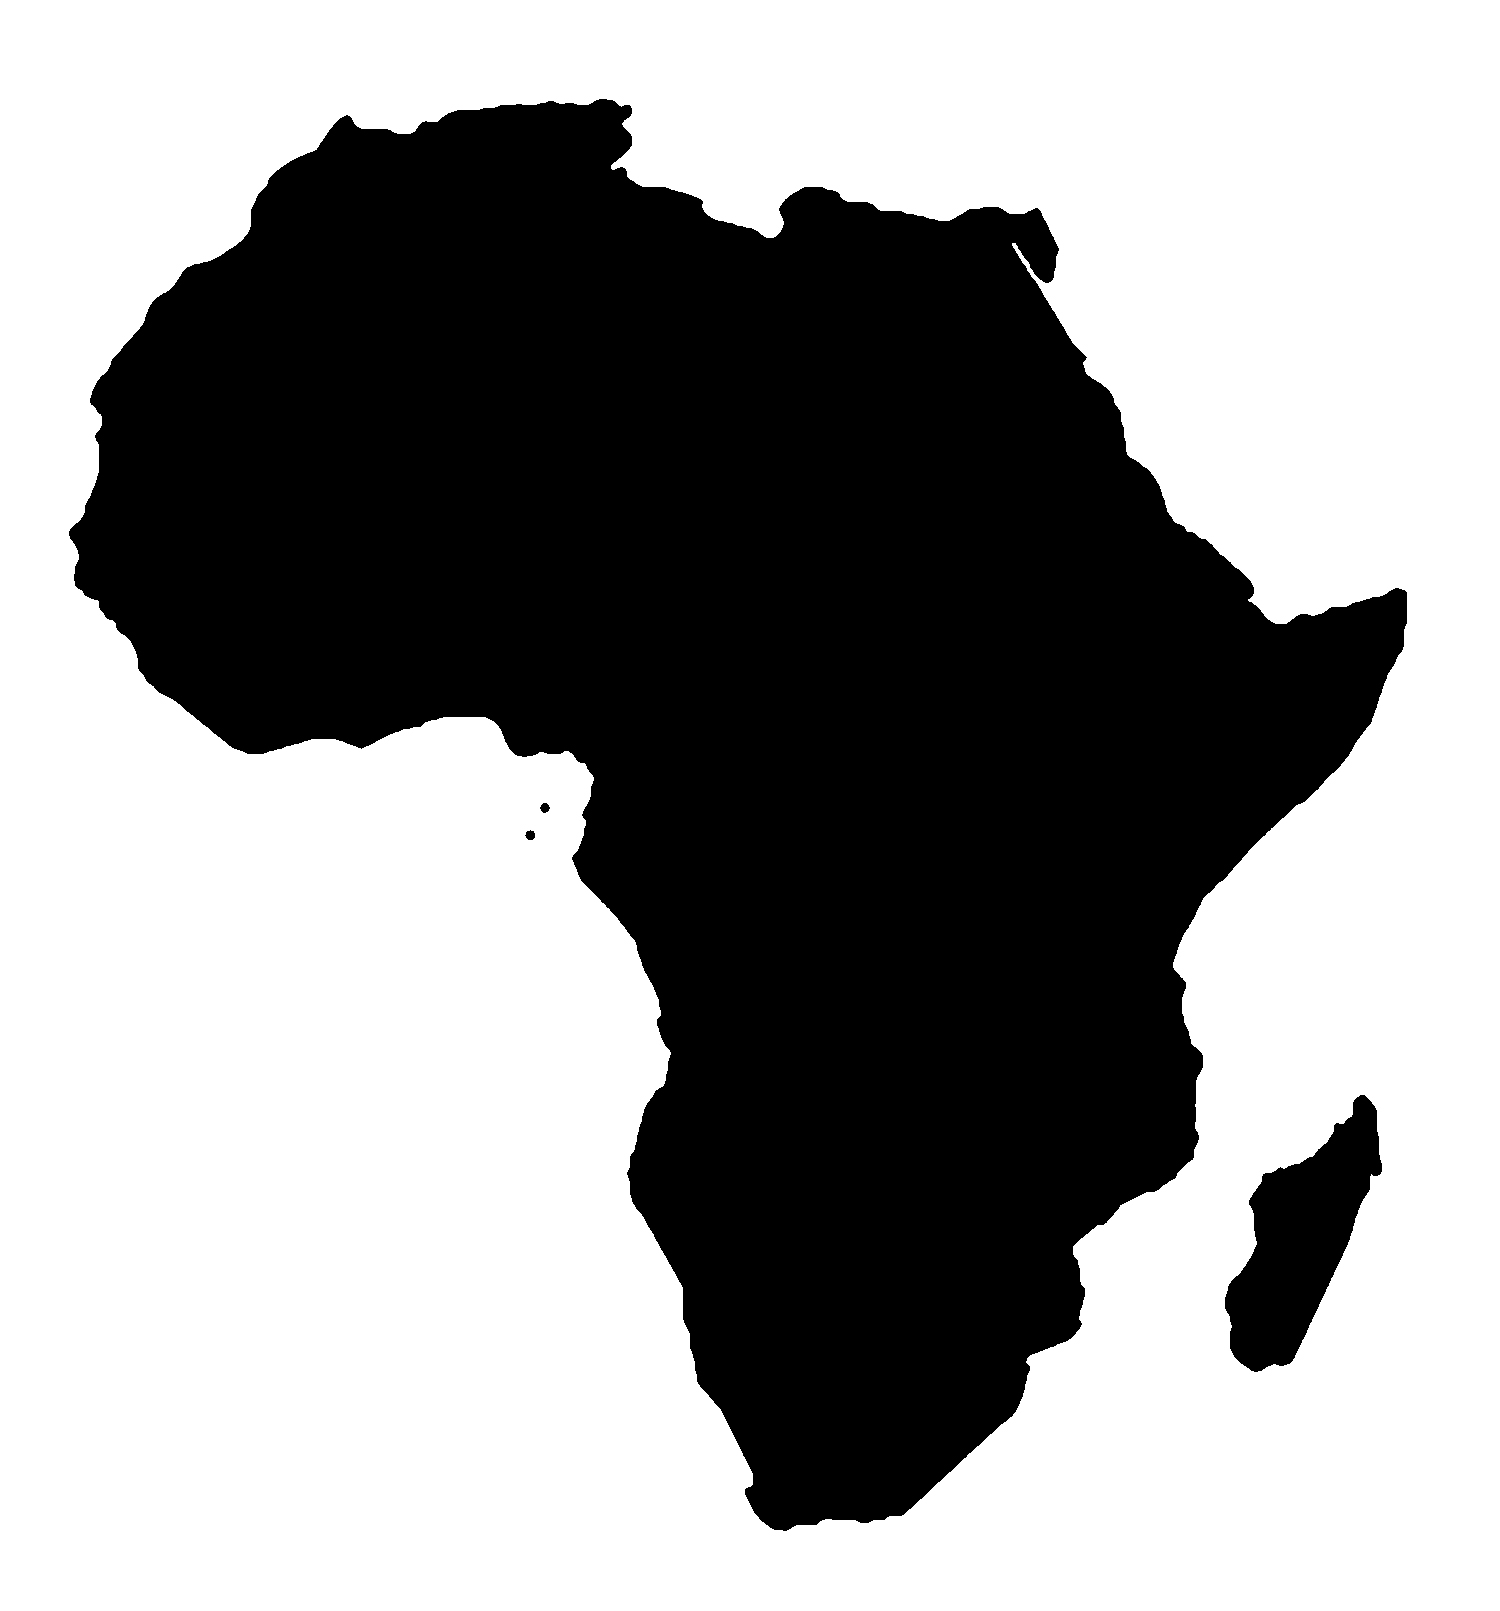 Silhouette map of Africa